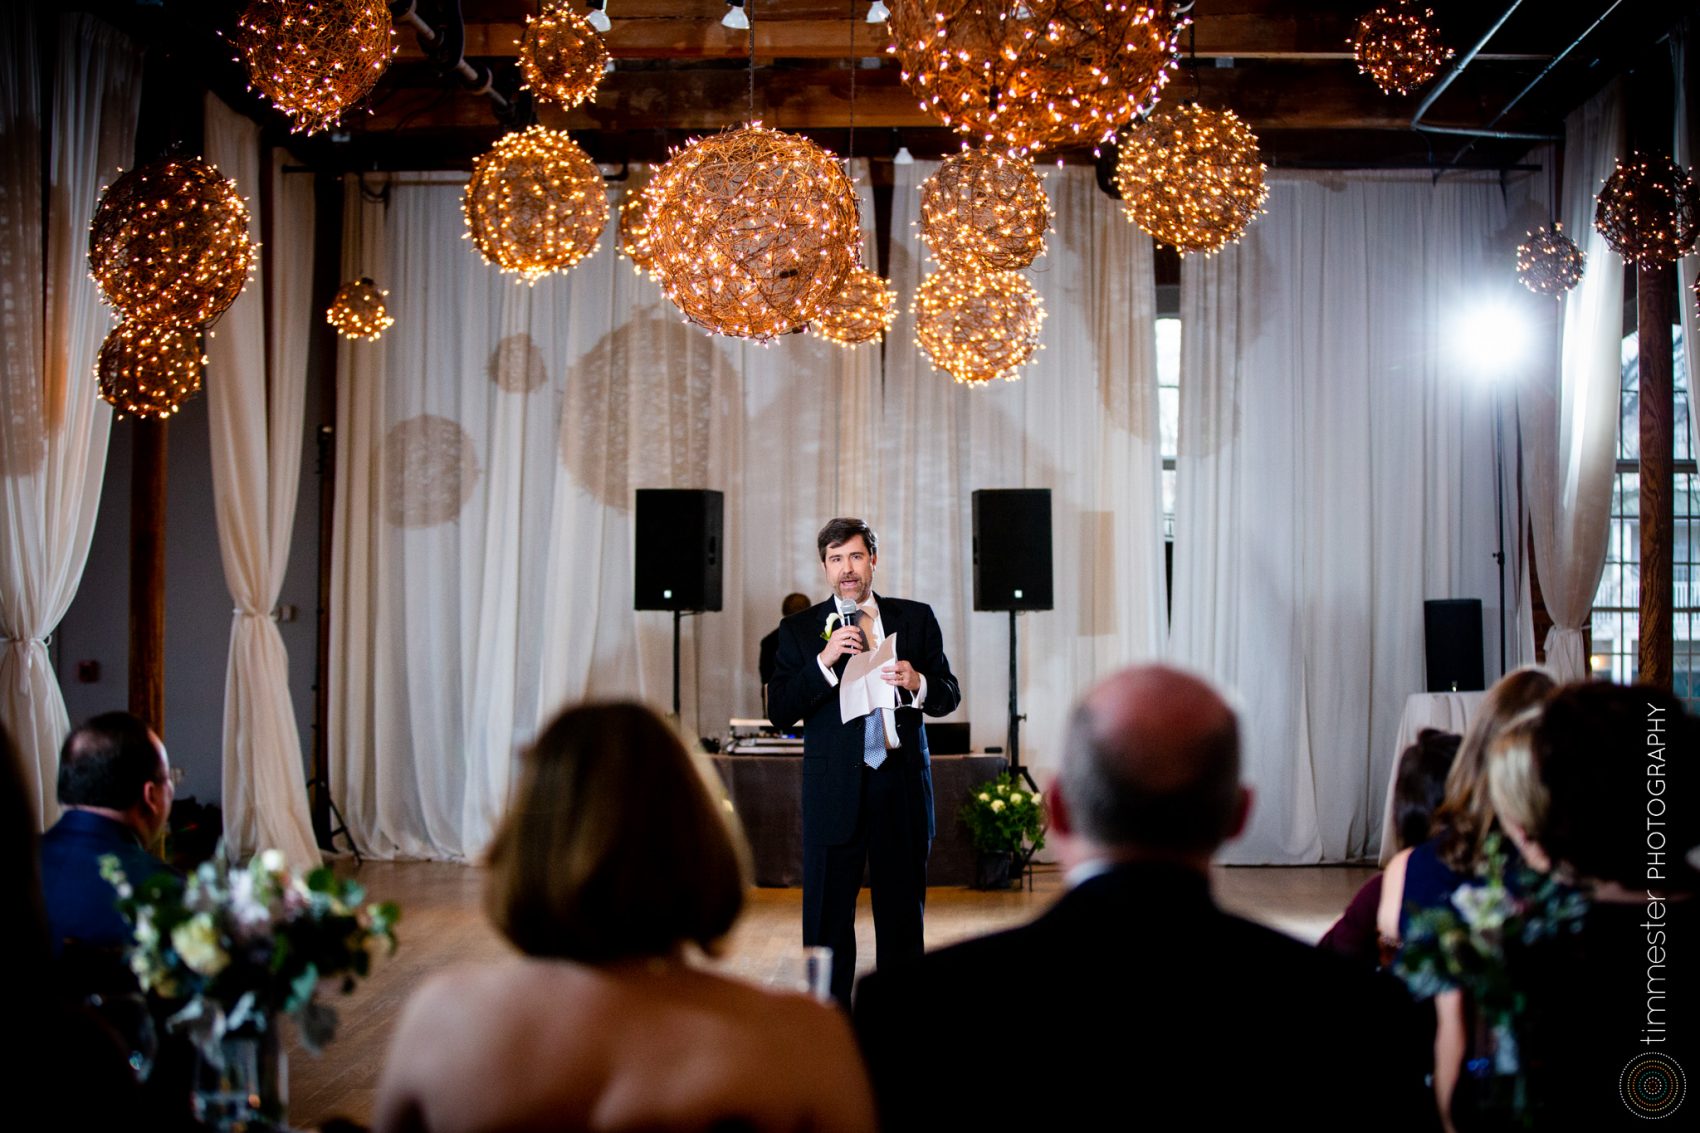 The best man's speech at The Cotton Room in Durham for Jessica + David's wedding.